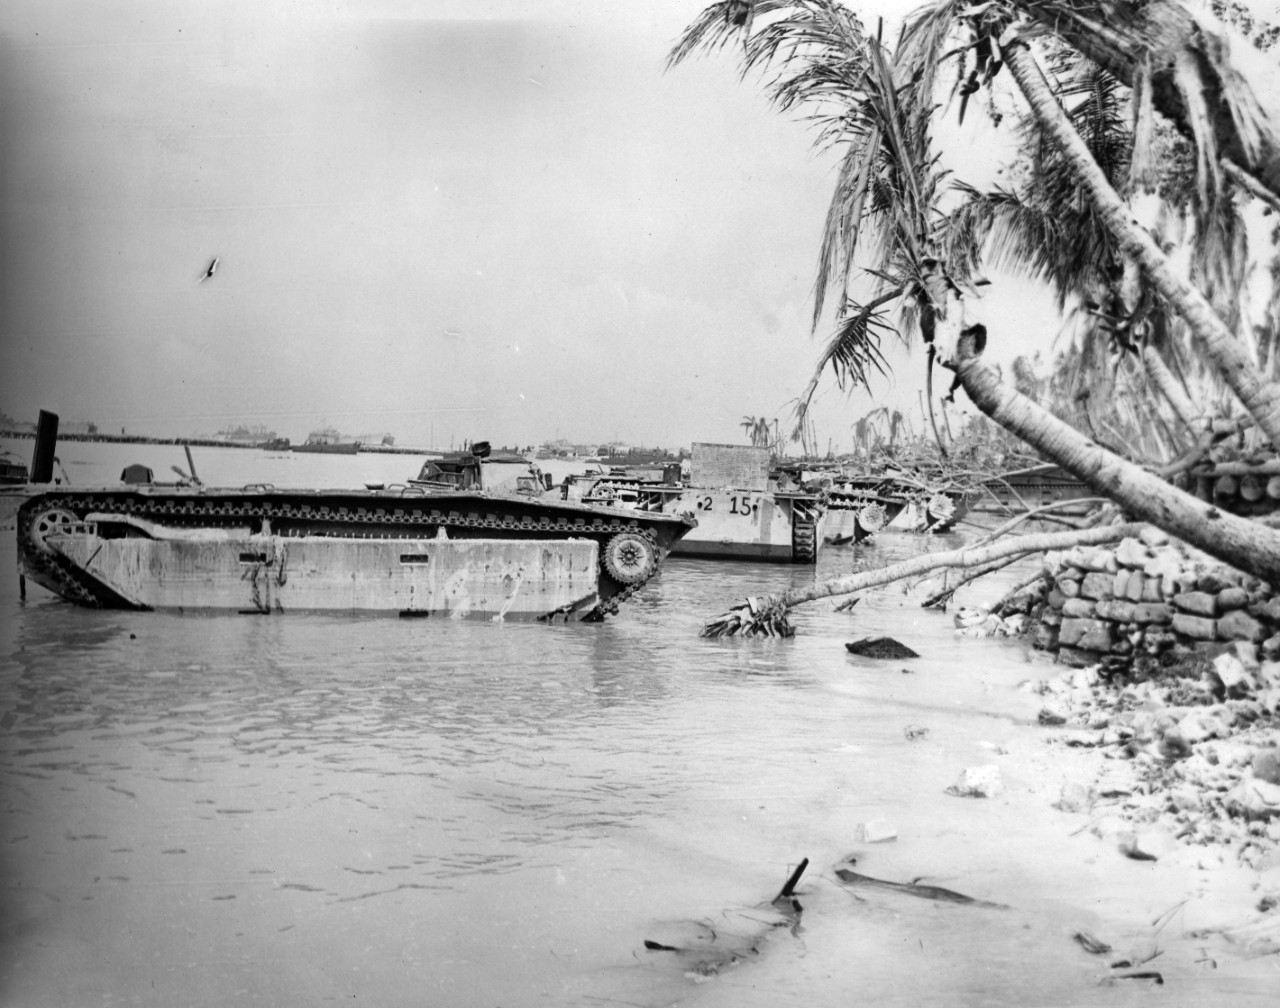 Abandoned LVTs on Tarawa post invasion. From the VADM Robert C. Giffen Photo Collection. 